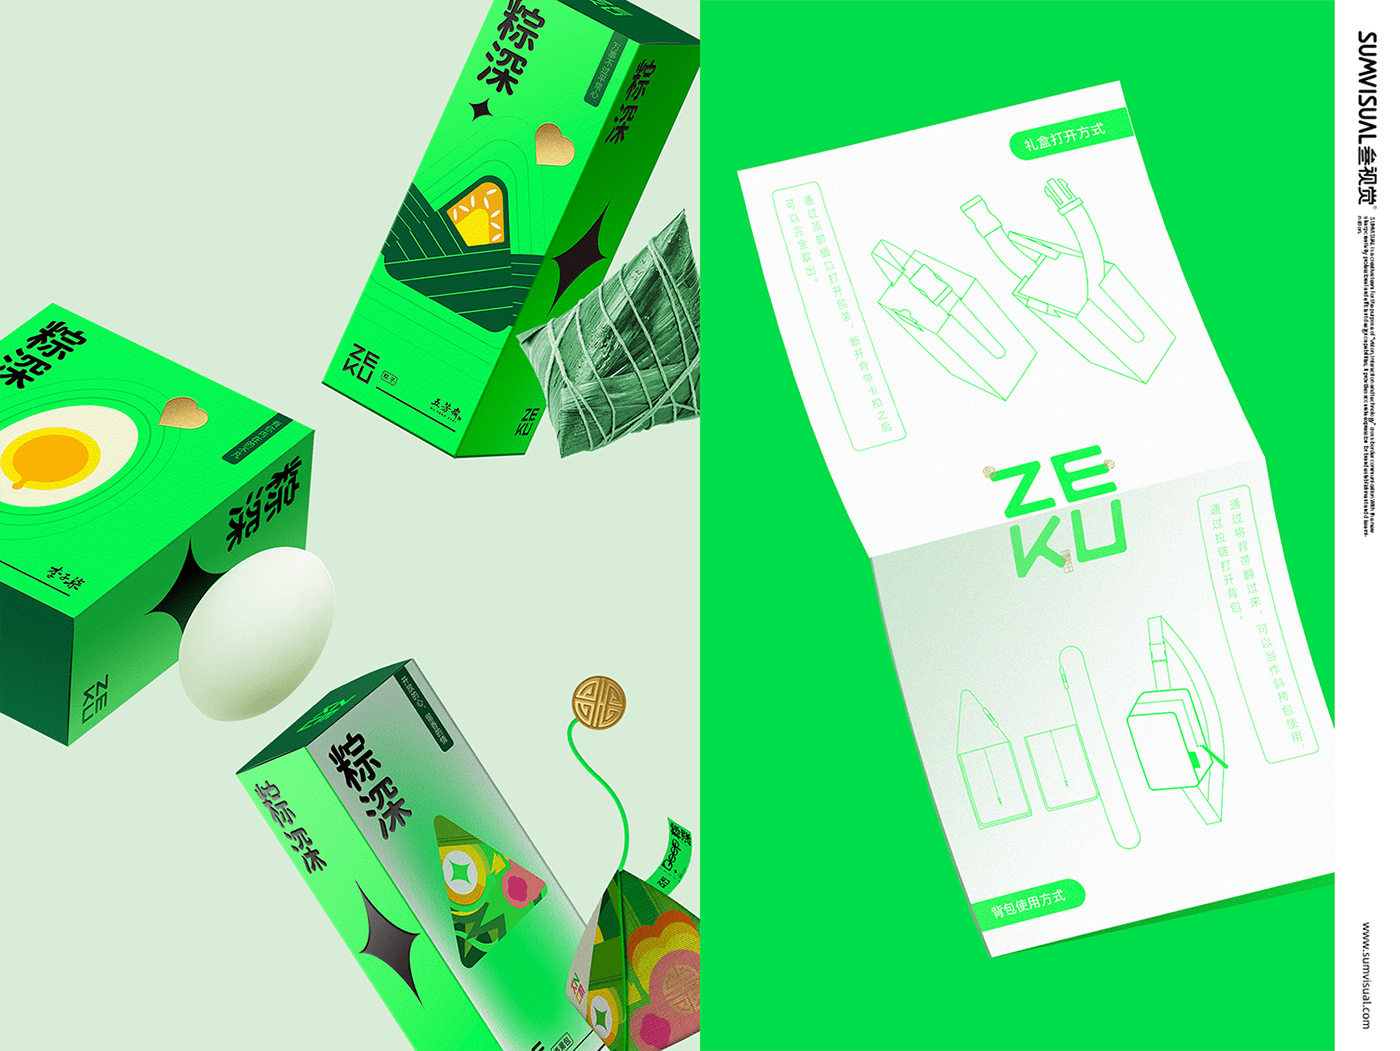 chinese culture Packing Design SUMVISUAL